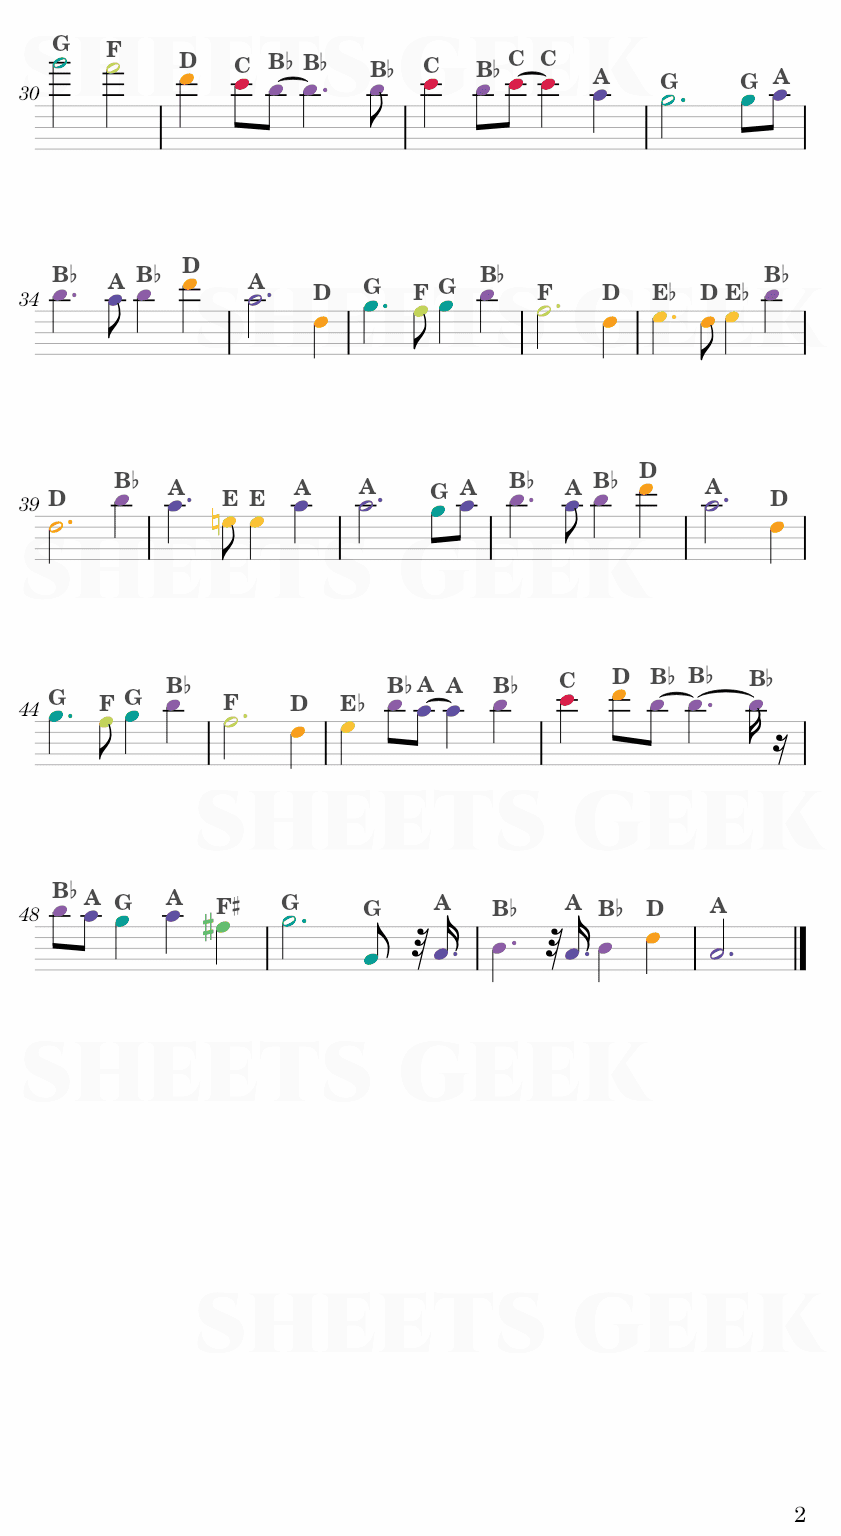 Carrying You - Laputa Castle in the Sky Theme Easy Sheet Music Free for piano, keyboard, flute, violin, sax, cello page 2